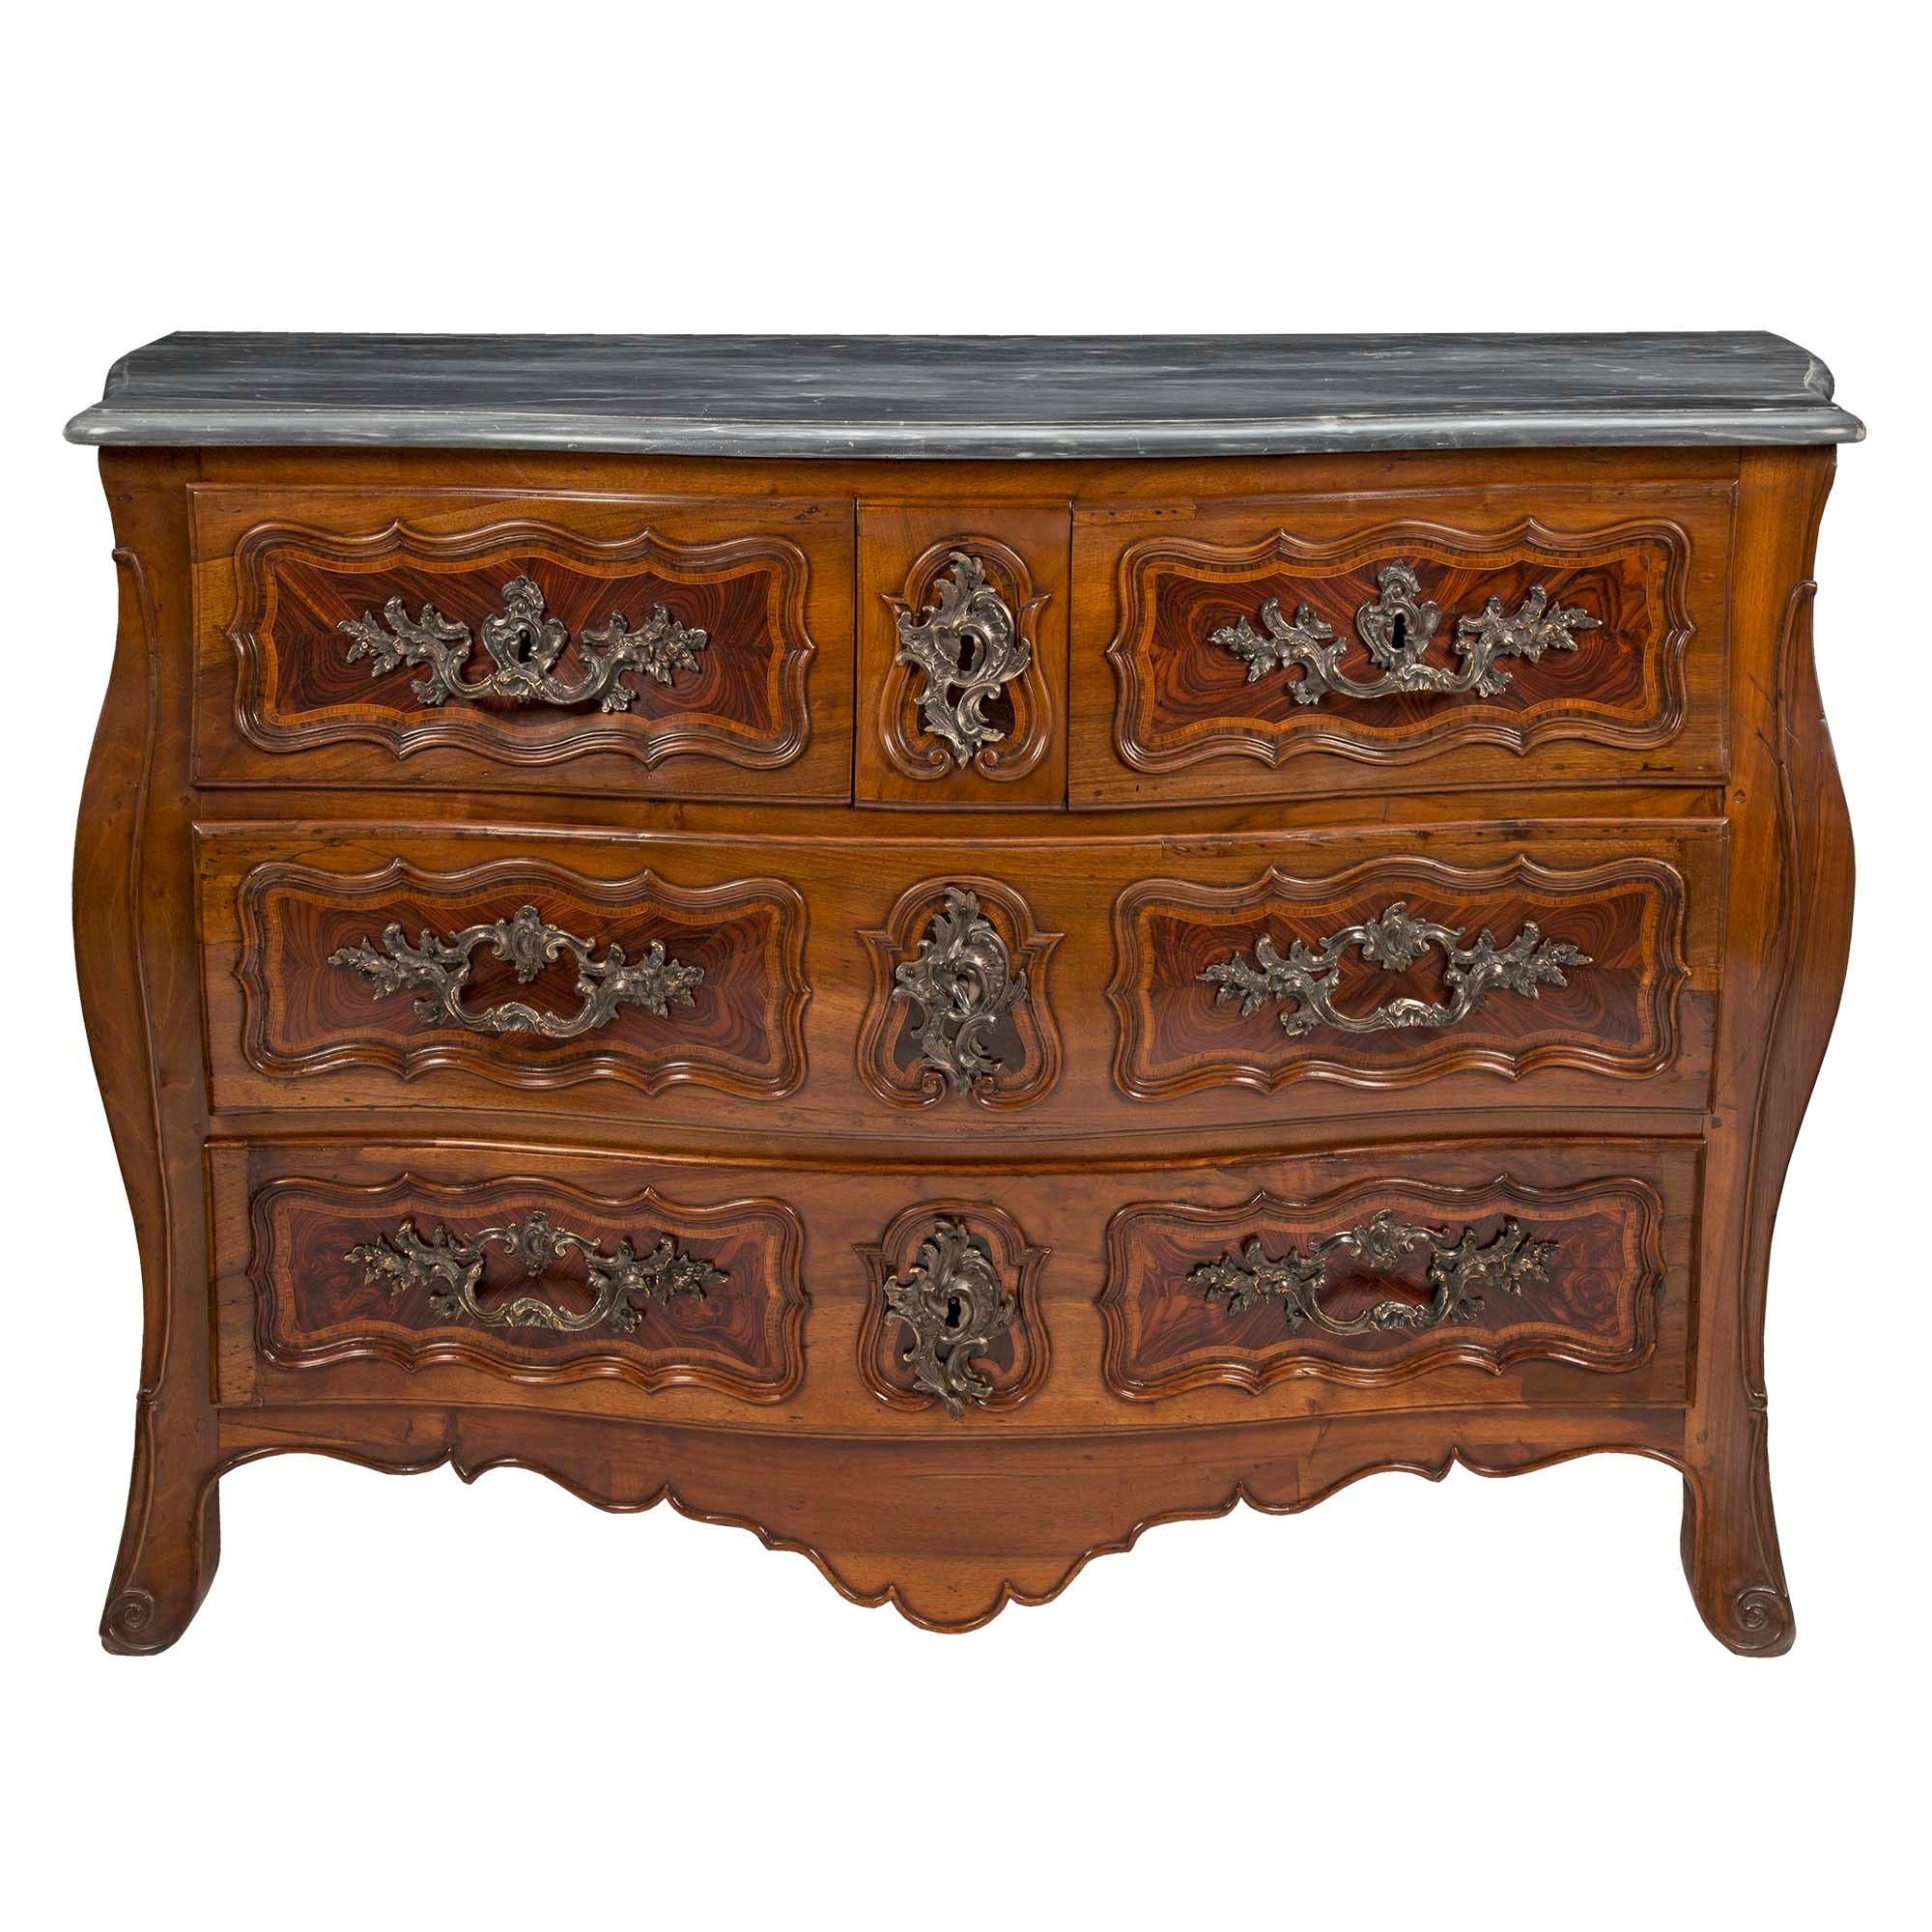 French Early 18th Century Louis XV Period Walnut Commode De Chateau For Sale